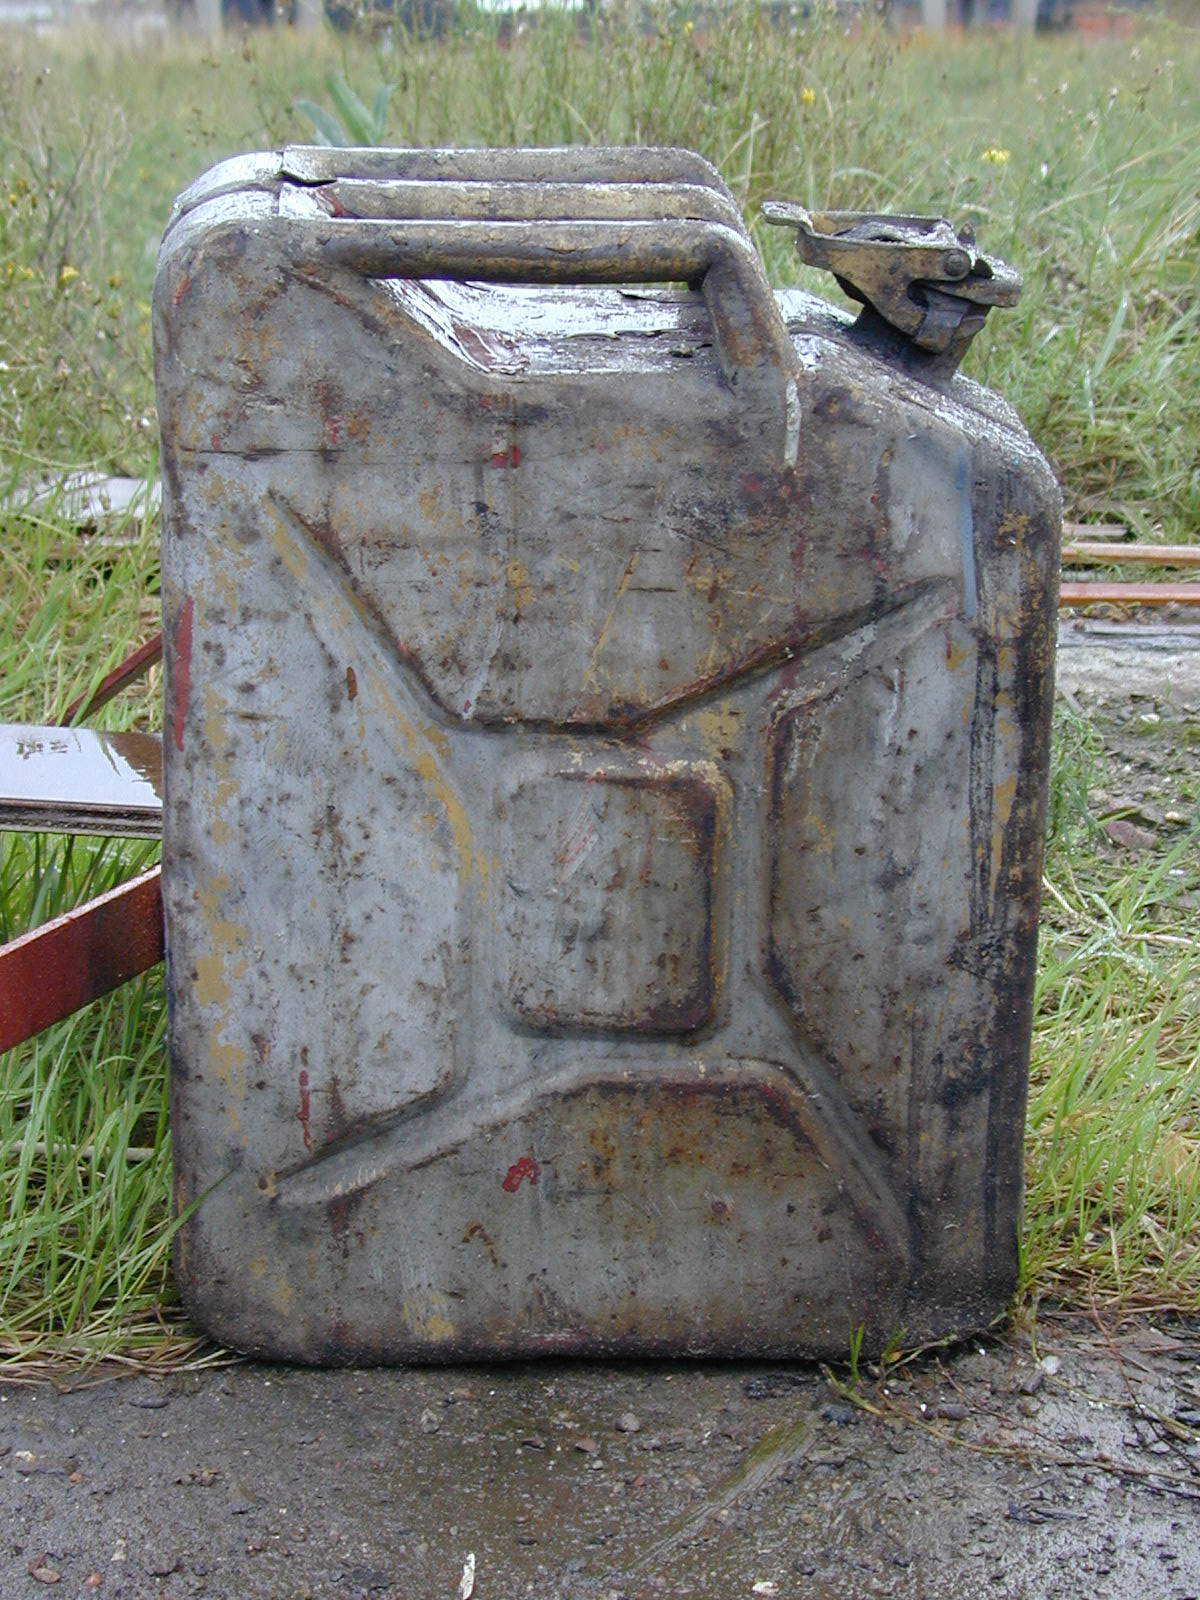 Download Image After Photos Objects Texture Side Metal Jerrycan Fuel Fuelcan Can Rusted Old Rectangle Yellowimages Mockups